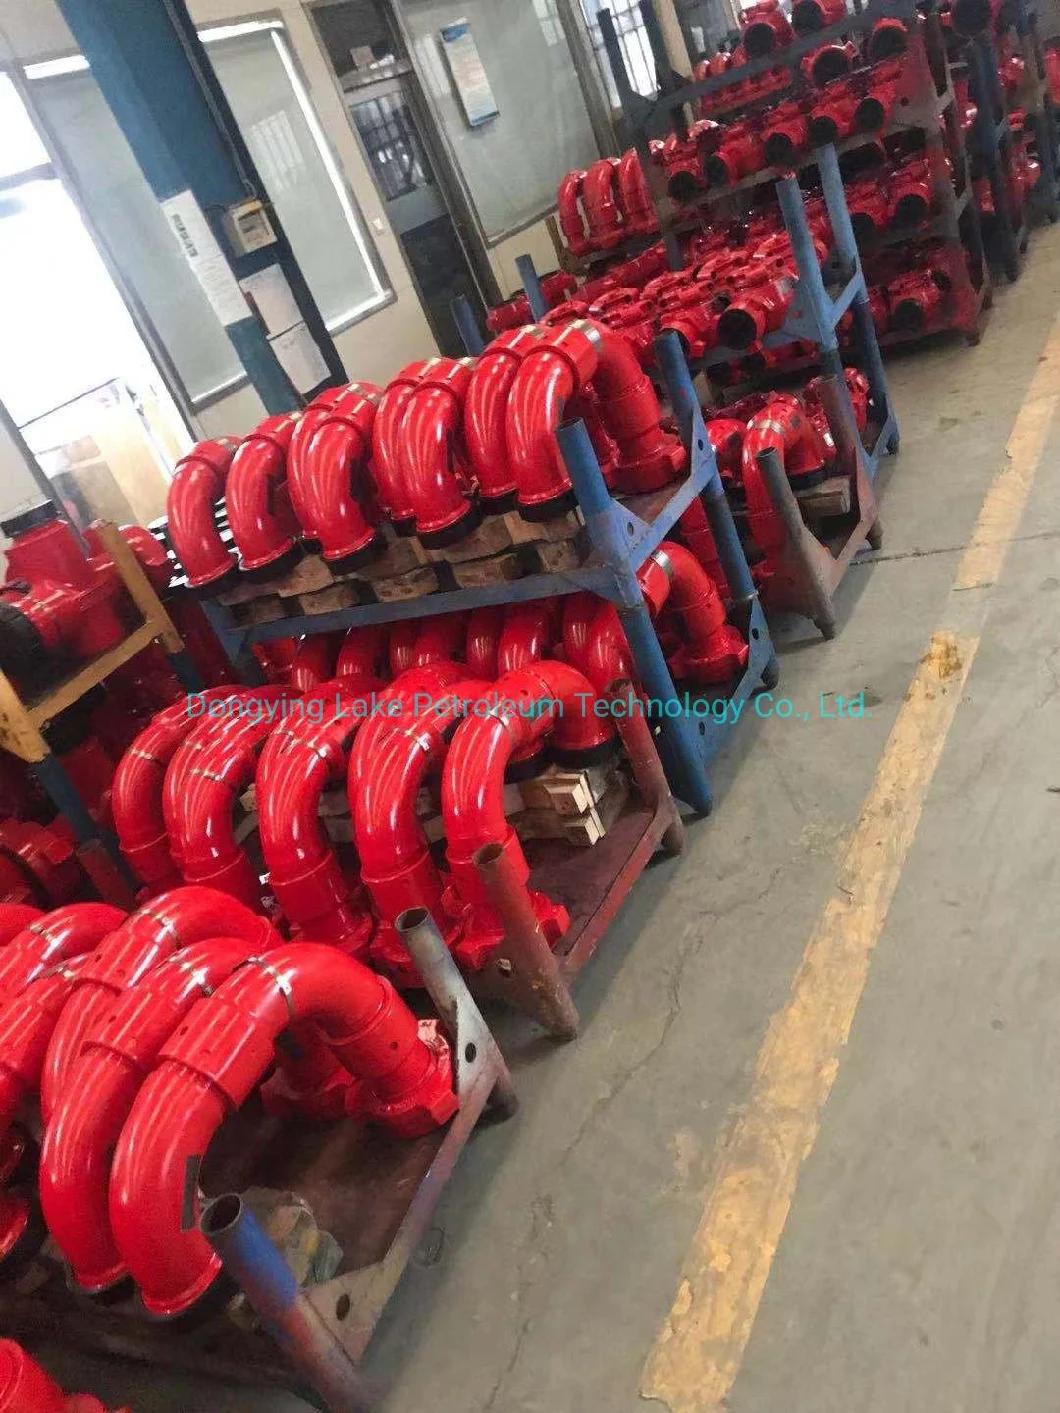 Swivel Joint Oilfield API 16c High Pressure Chiksan Swivel Joint Active Elbow for Oilfield Equipment